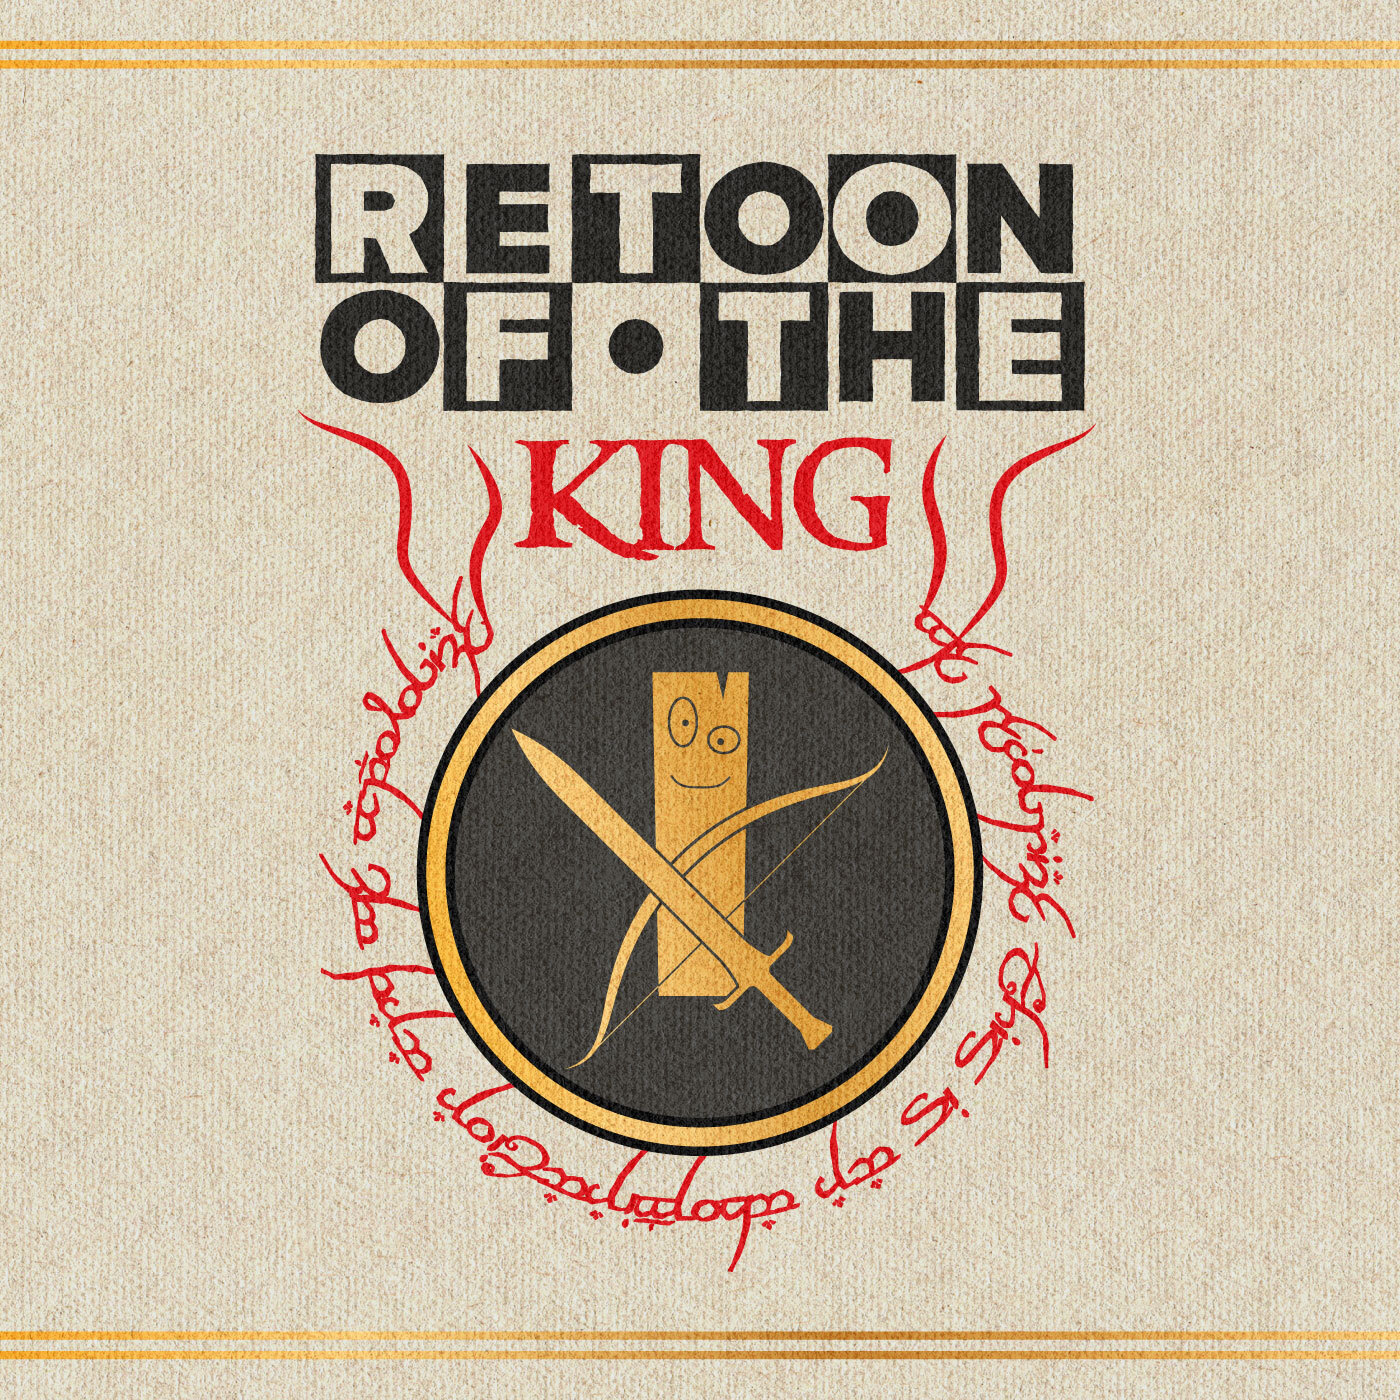 The title "ReToon of the King" stylized to mimic a combination of visual styles between the Cartoon Network logo and a Lord of the Rings book cover. In the center, a sword and bow are crossed in front of Plank from Ed, Edd, n Eddy. Text in imitation Elvish script reads "We recognize this is an abomination and we apologize".